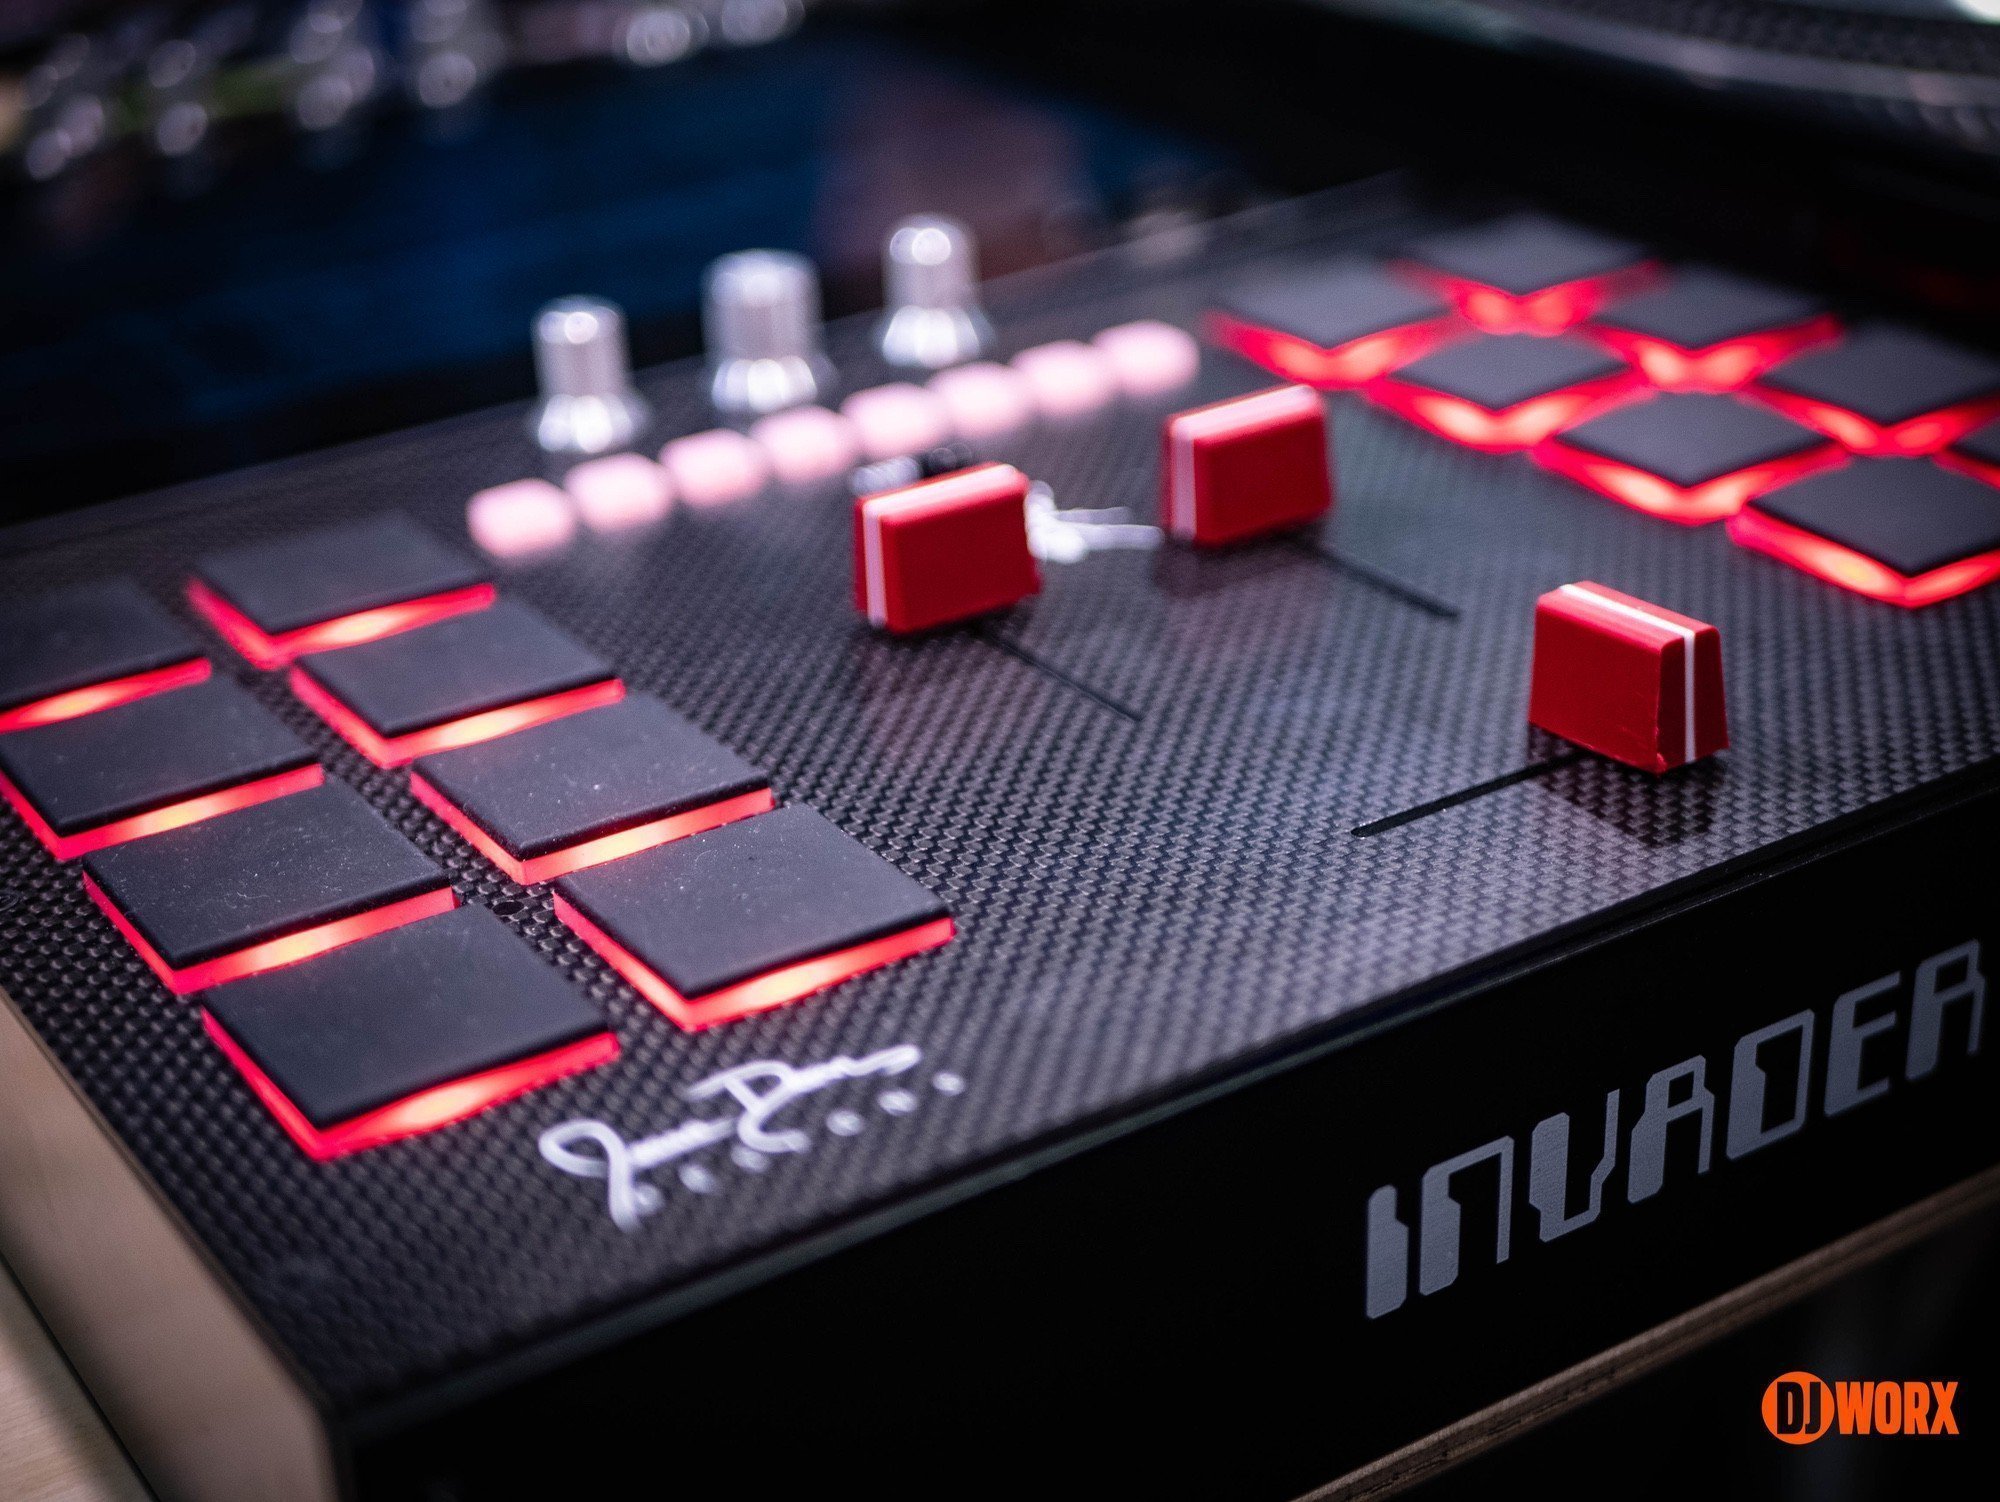 That Thud Rumble mixer with the screen gets a name — The Invader 